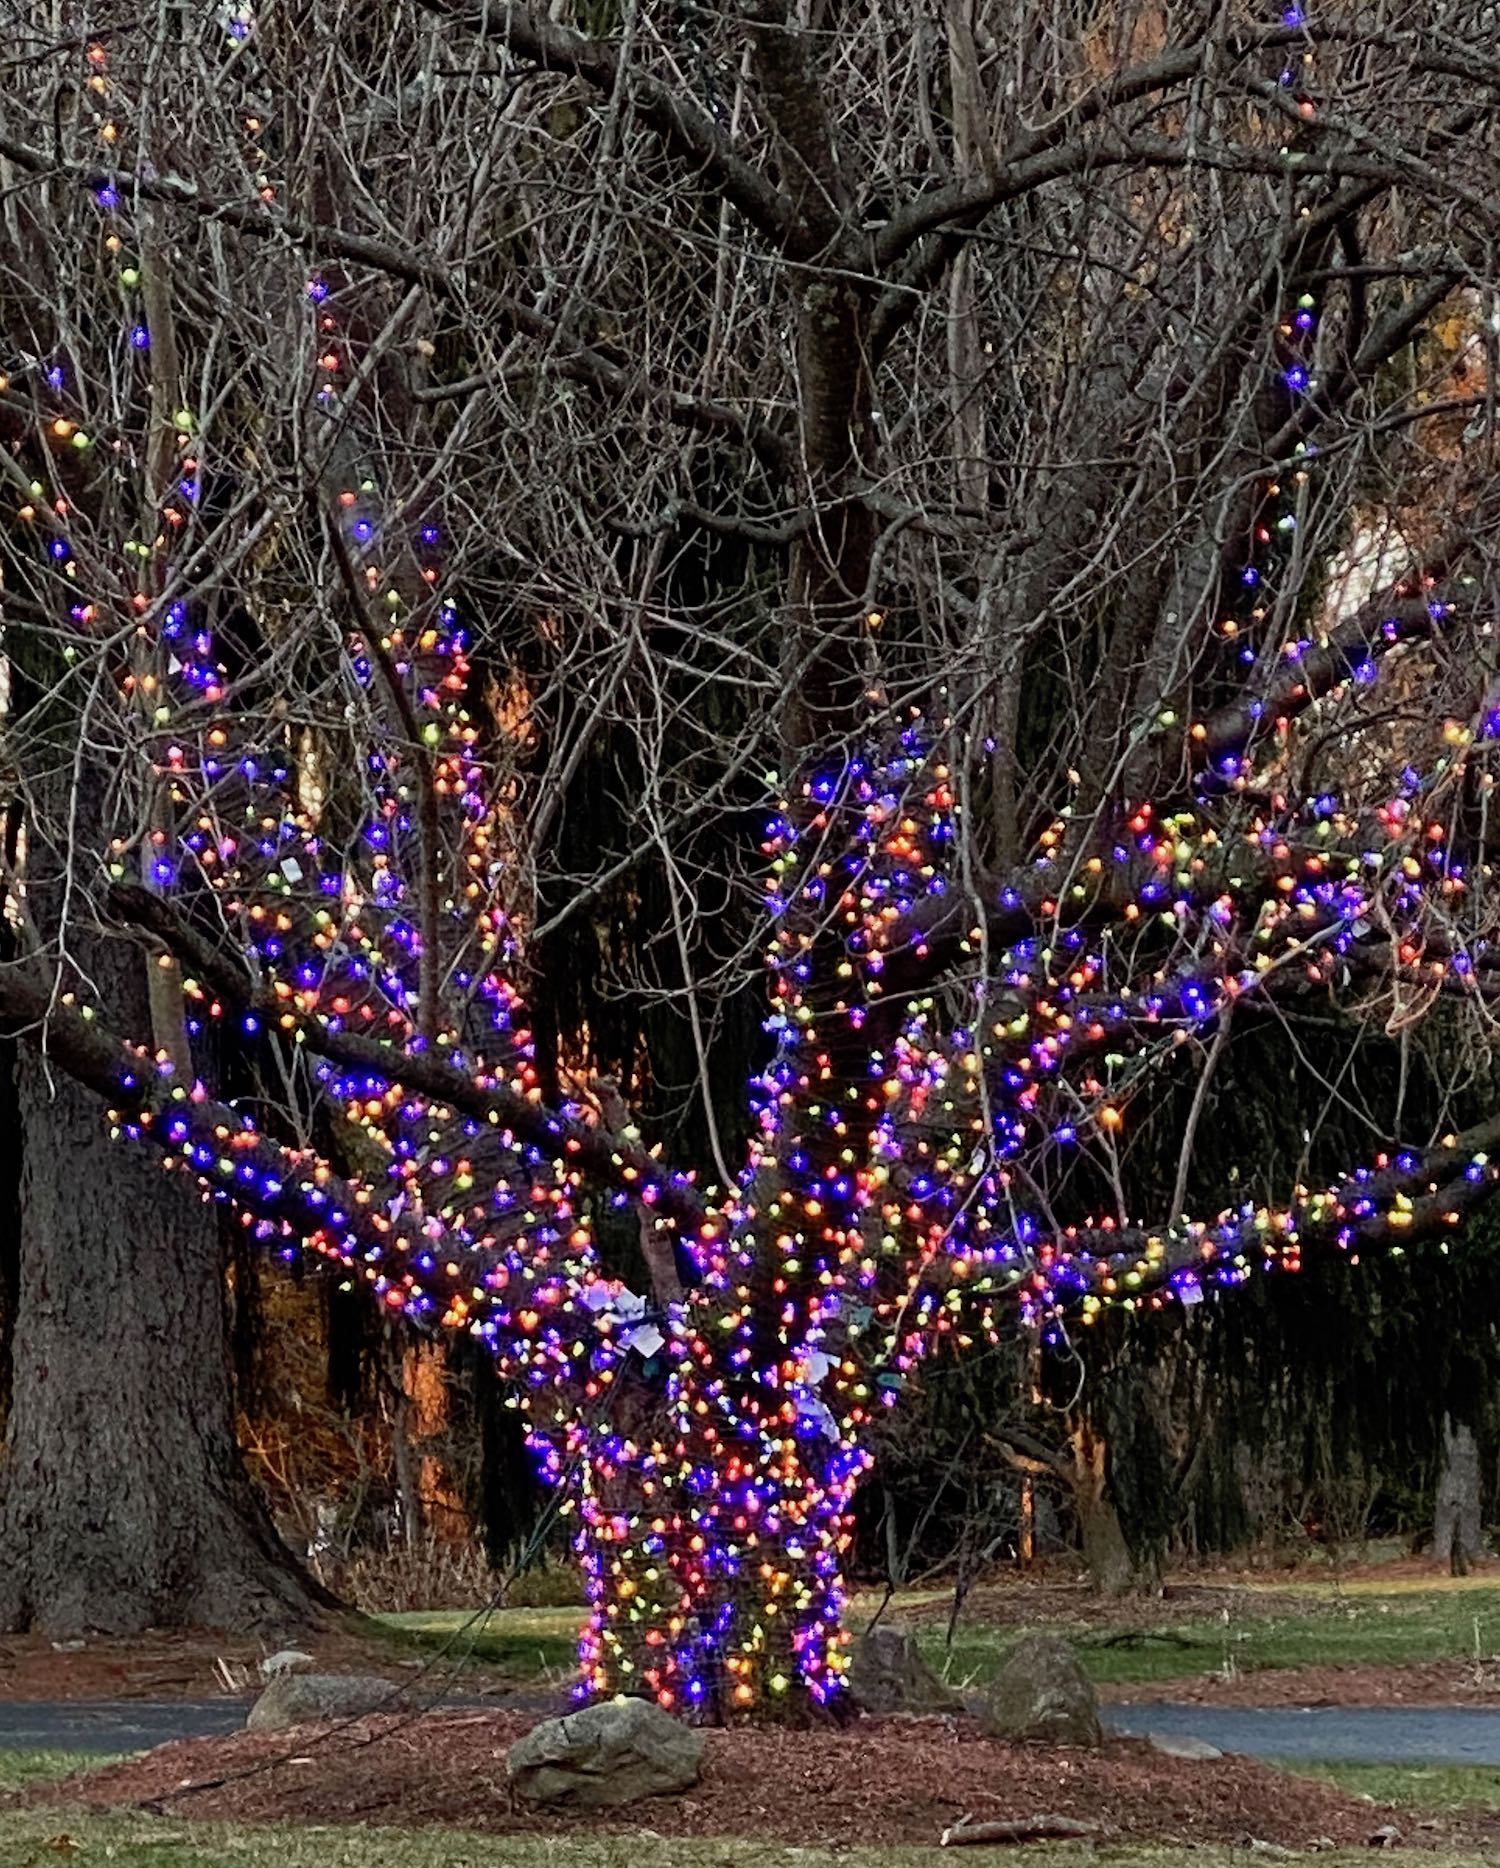 It's the weekend! Number 274, Neighborhood Tree Decorated with Holiday Lights